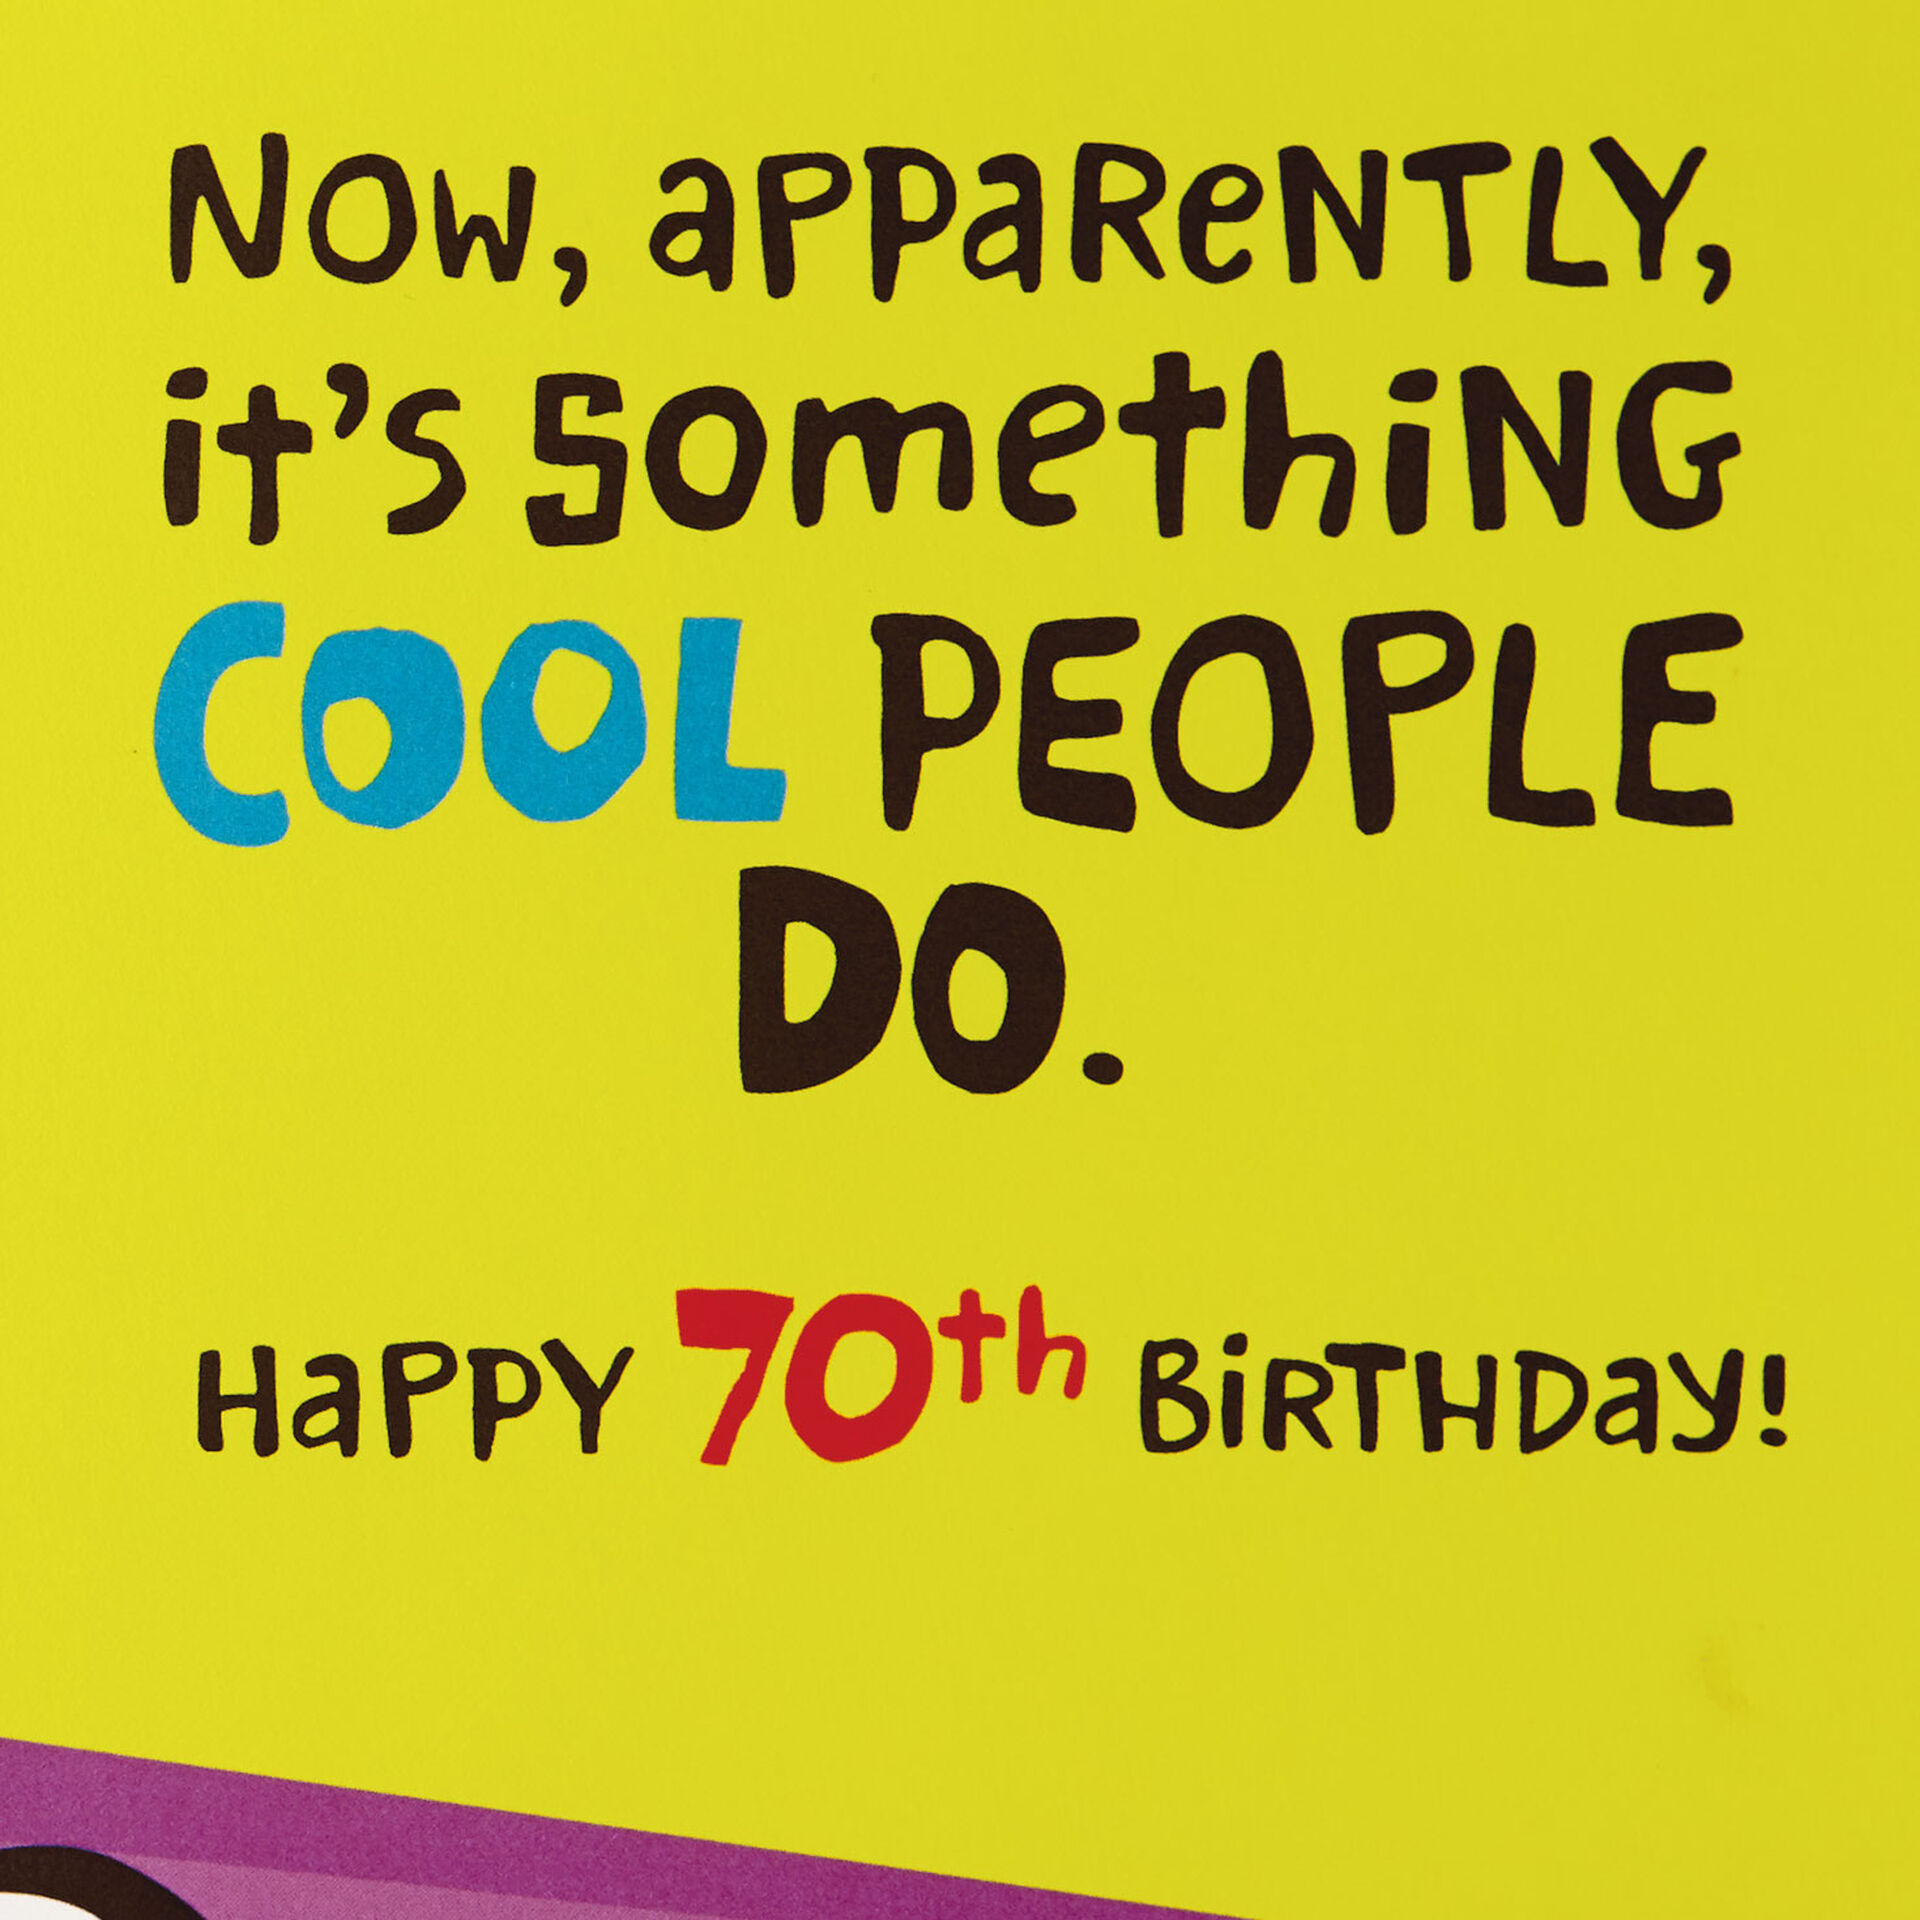 you-re-one-of-the-cool-ones-funny-70th-birthday-card-greeting-cards